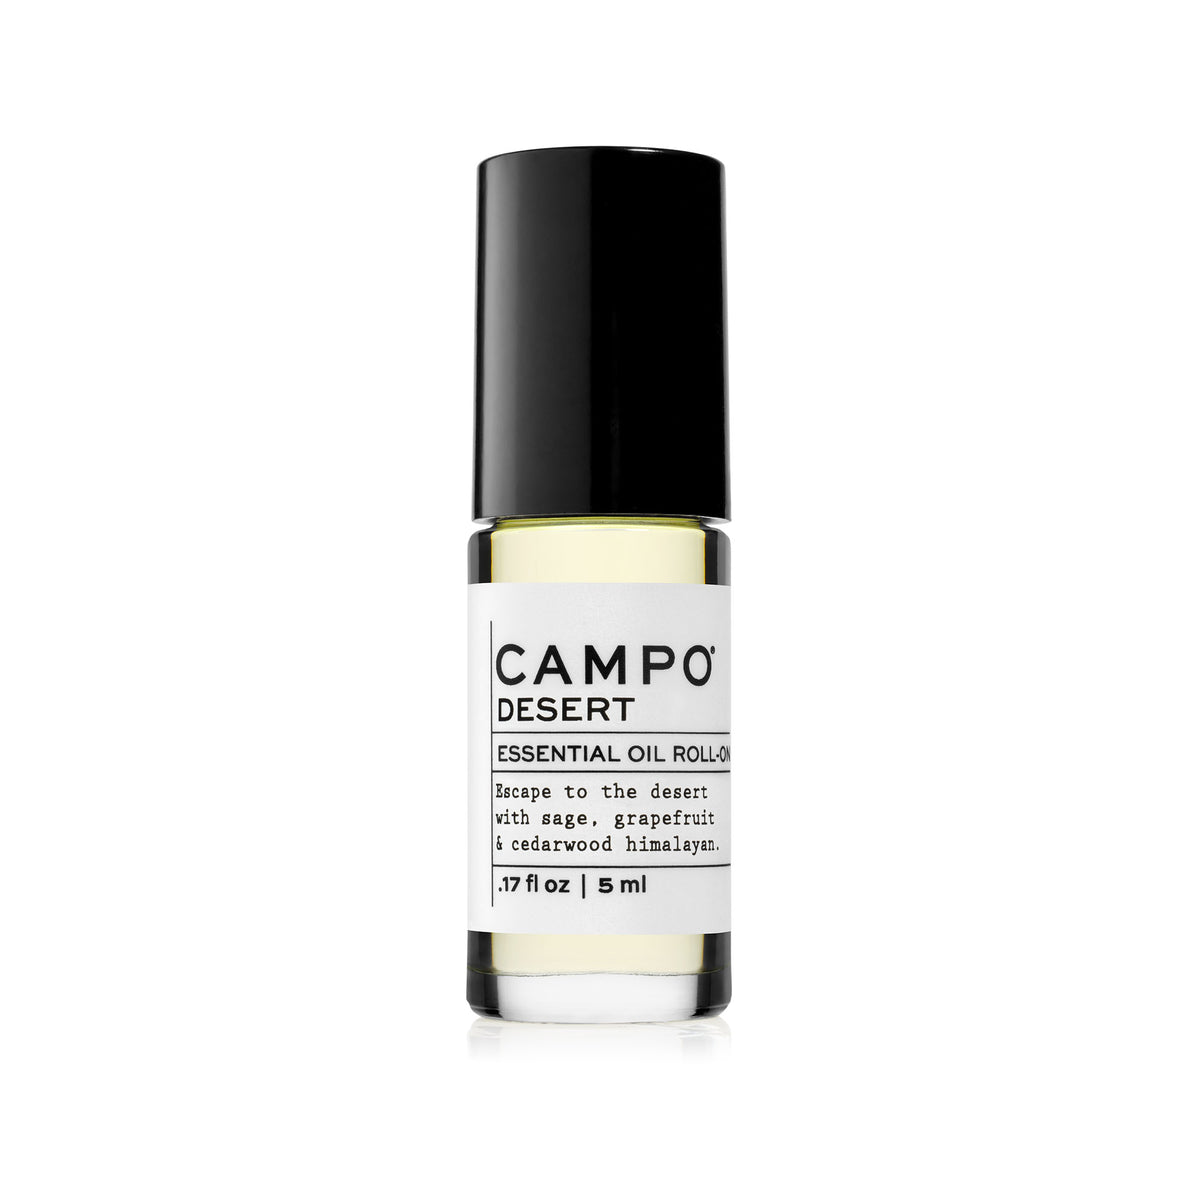 WOODS Beauty Essential Oil DESERT Roll-On in 5 ml. Escape to the canyon with this 100% pure essential oil blend of juniper berry, patchouli, eucalyptus radiate, and sandalwood. Inspired by hikes through rustling eucalyptus, juniper berry &amp; patchouli-filled mountains.